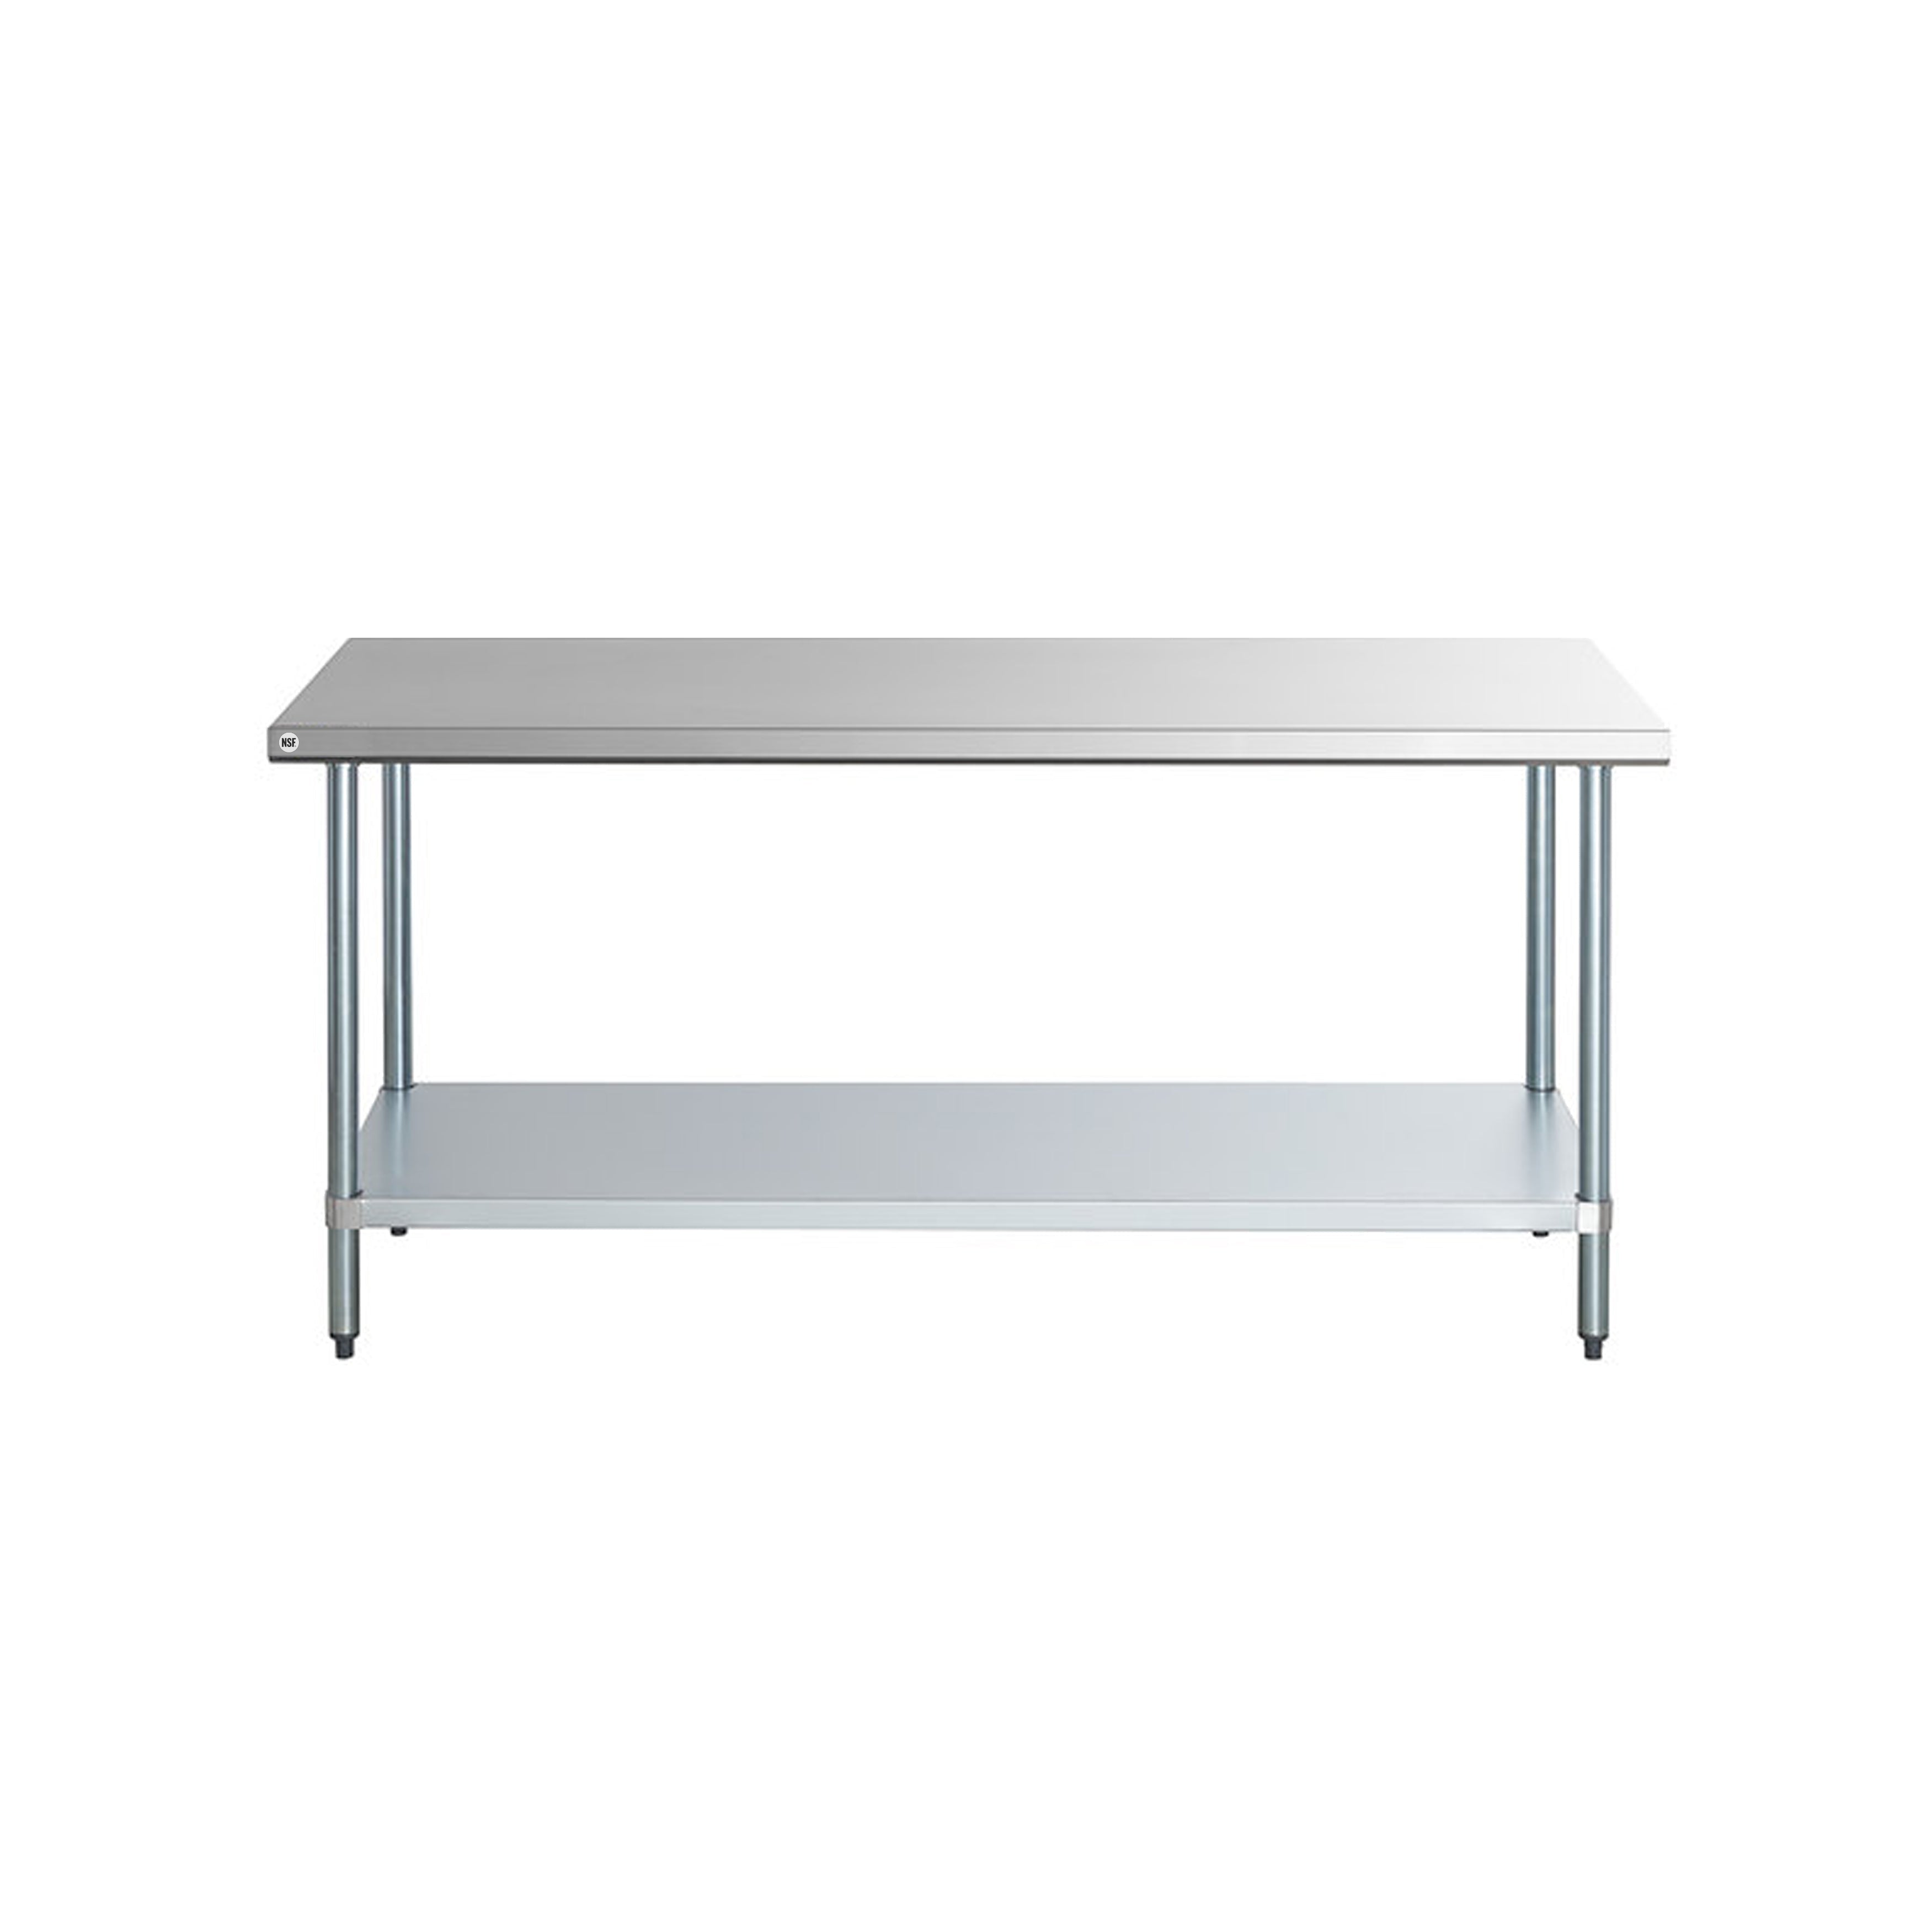 Omcan - 22075, Commercial 30" x 72" Stainless Steel Kitchen Work Table 1300lbs Light Duty